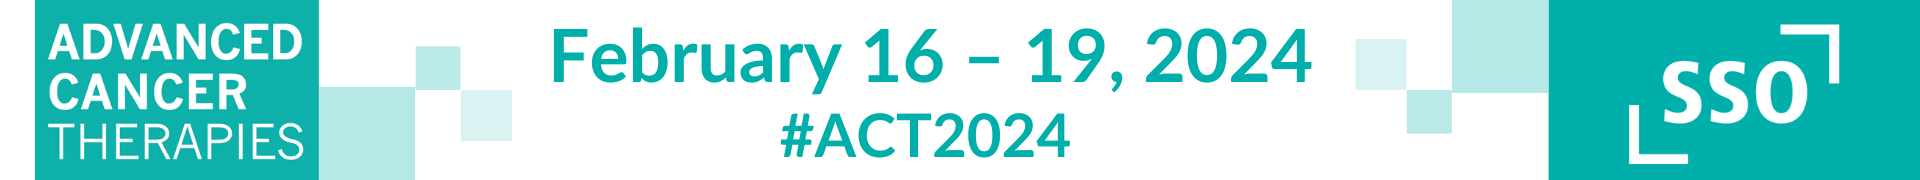 Advanced Cancer Therapies 2024 Event Banner